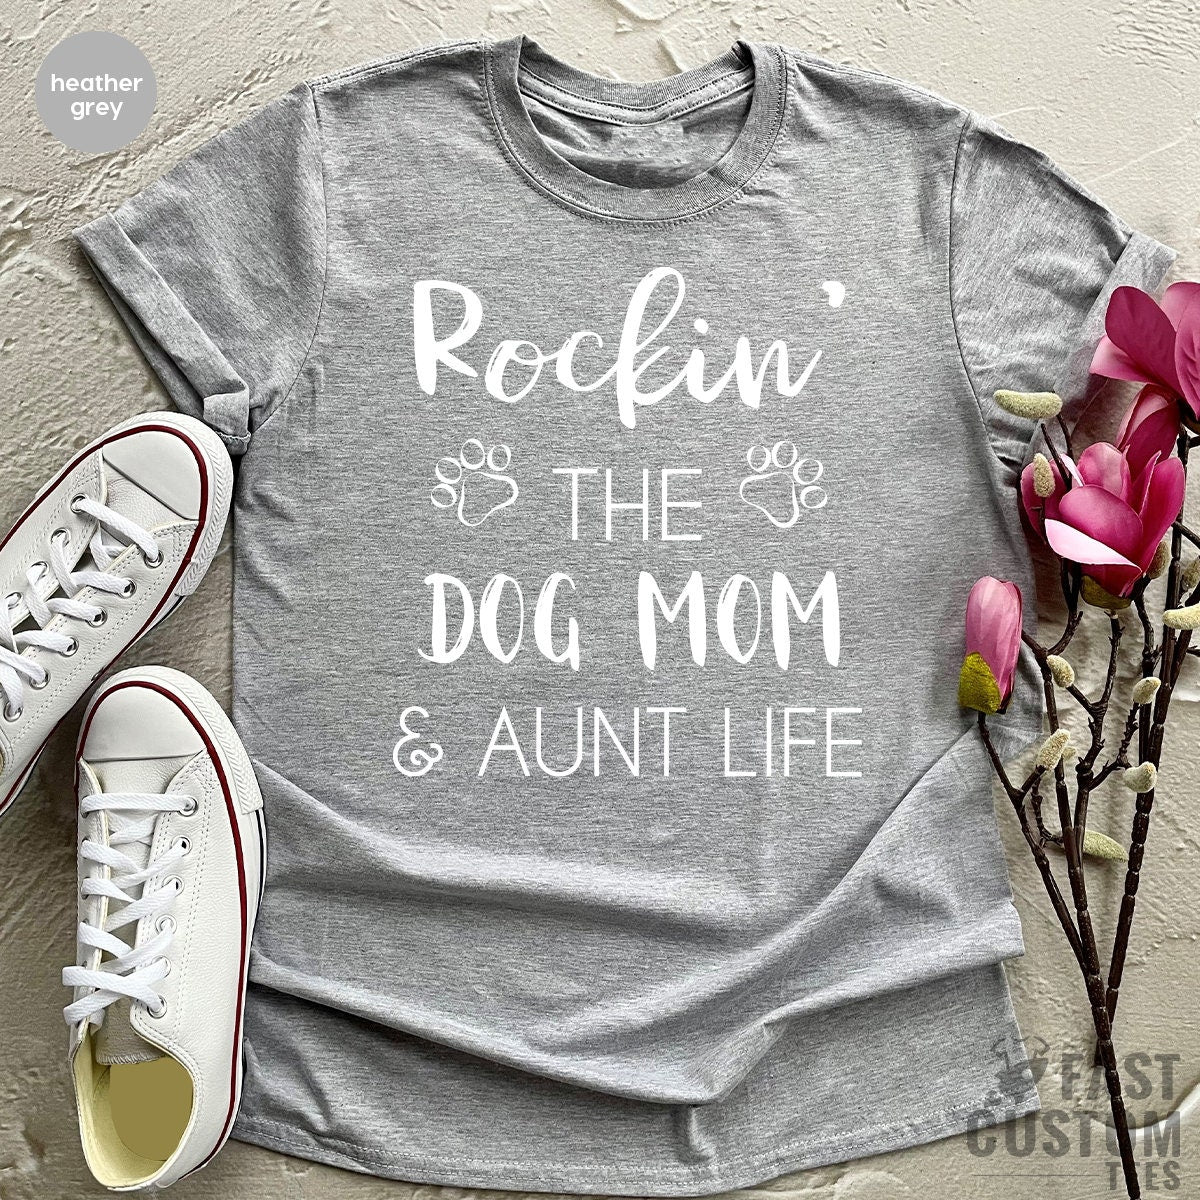 Dog Mom TShirt, Aunt Dog Mama Tee, Gift For Sister, Dog Mom Auntie Shirt, Dog Mom And Aunt Life, Dog Lover Aunt Tee, Best Aunt Gift - Fastdeliverytees.com